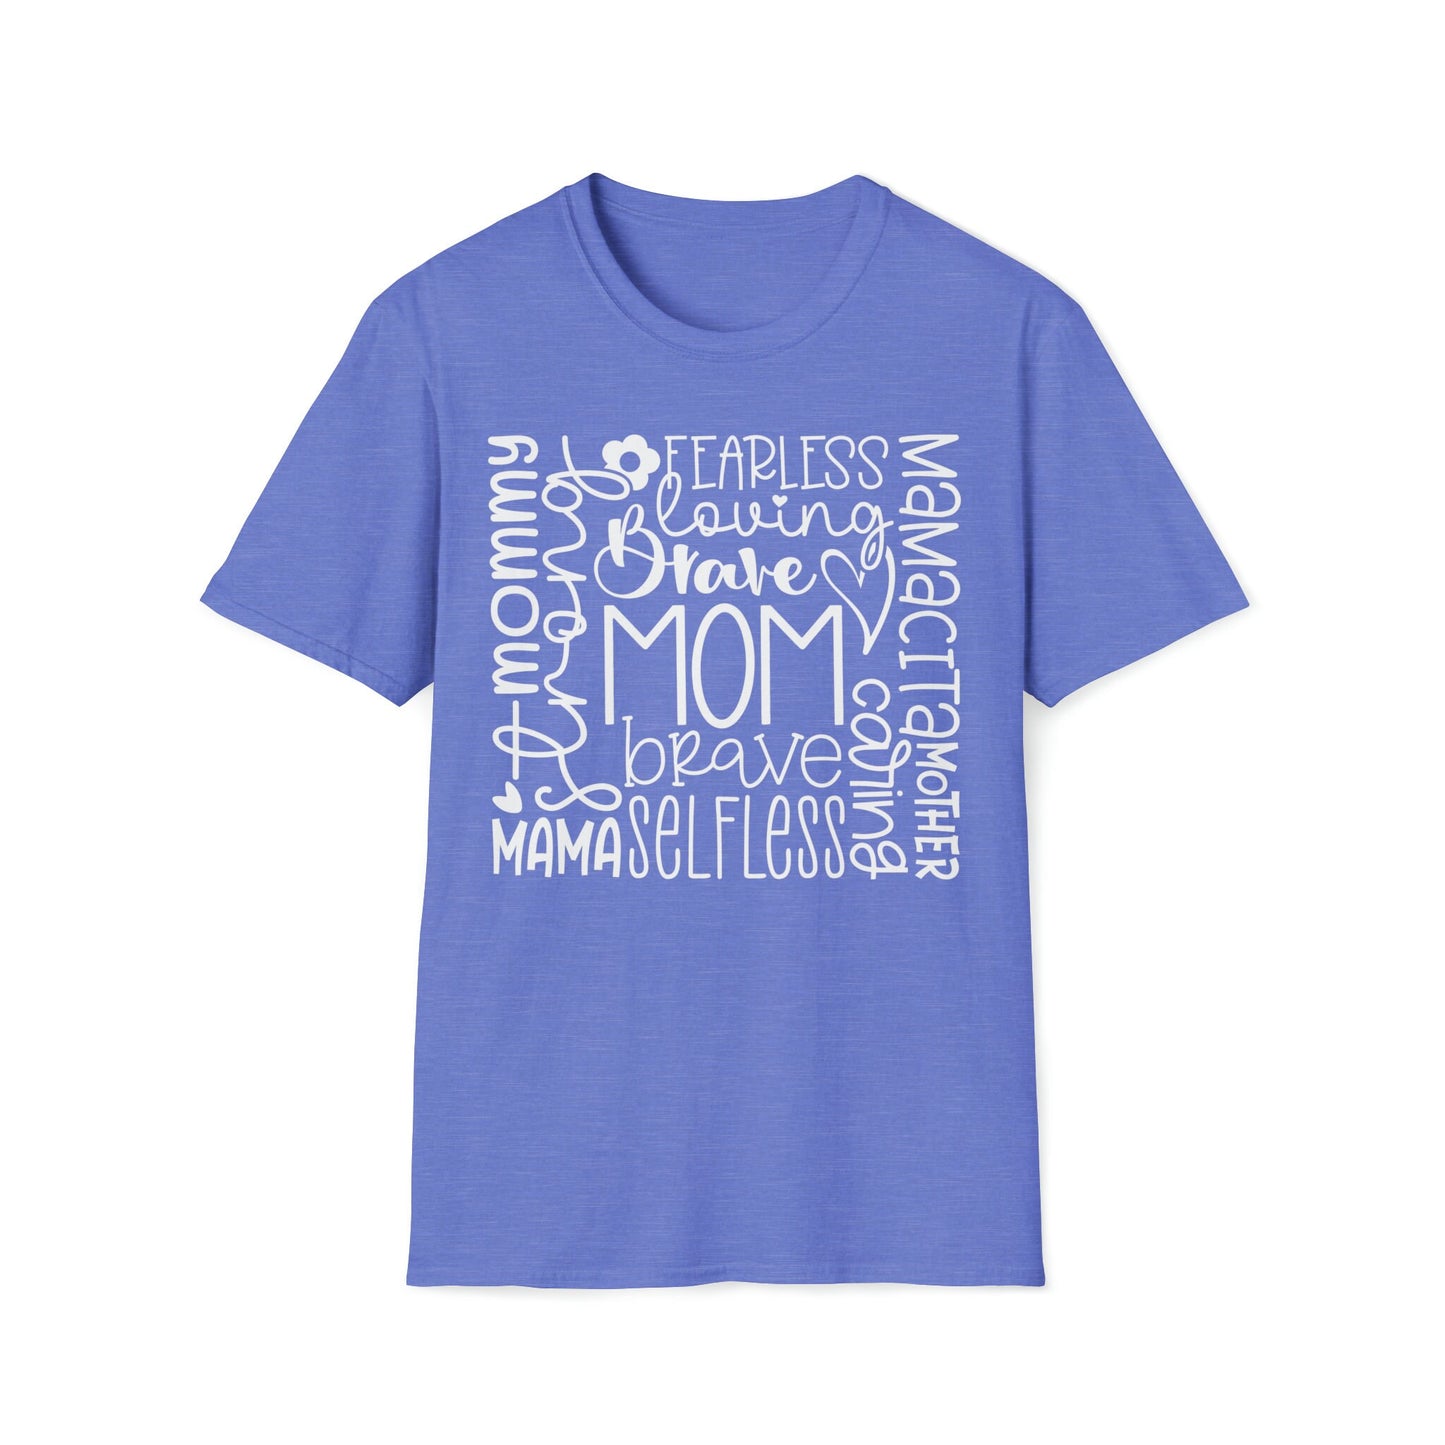 Mom Qualities Subway - Best Mom - Celebrate Mom - Strong Woman - Mom Humor - Unisex Softstyle T-Shirt